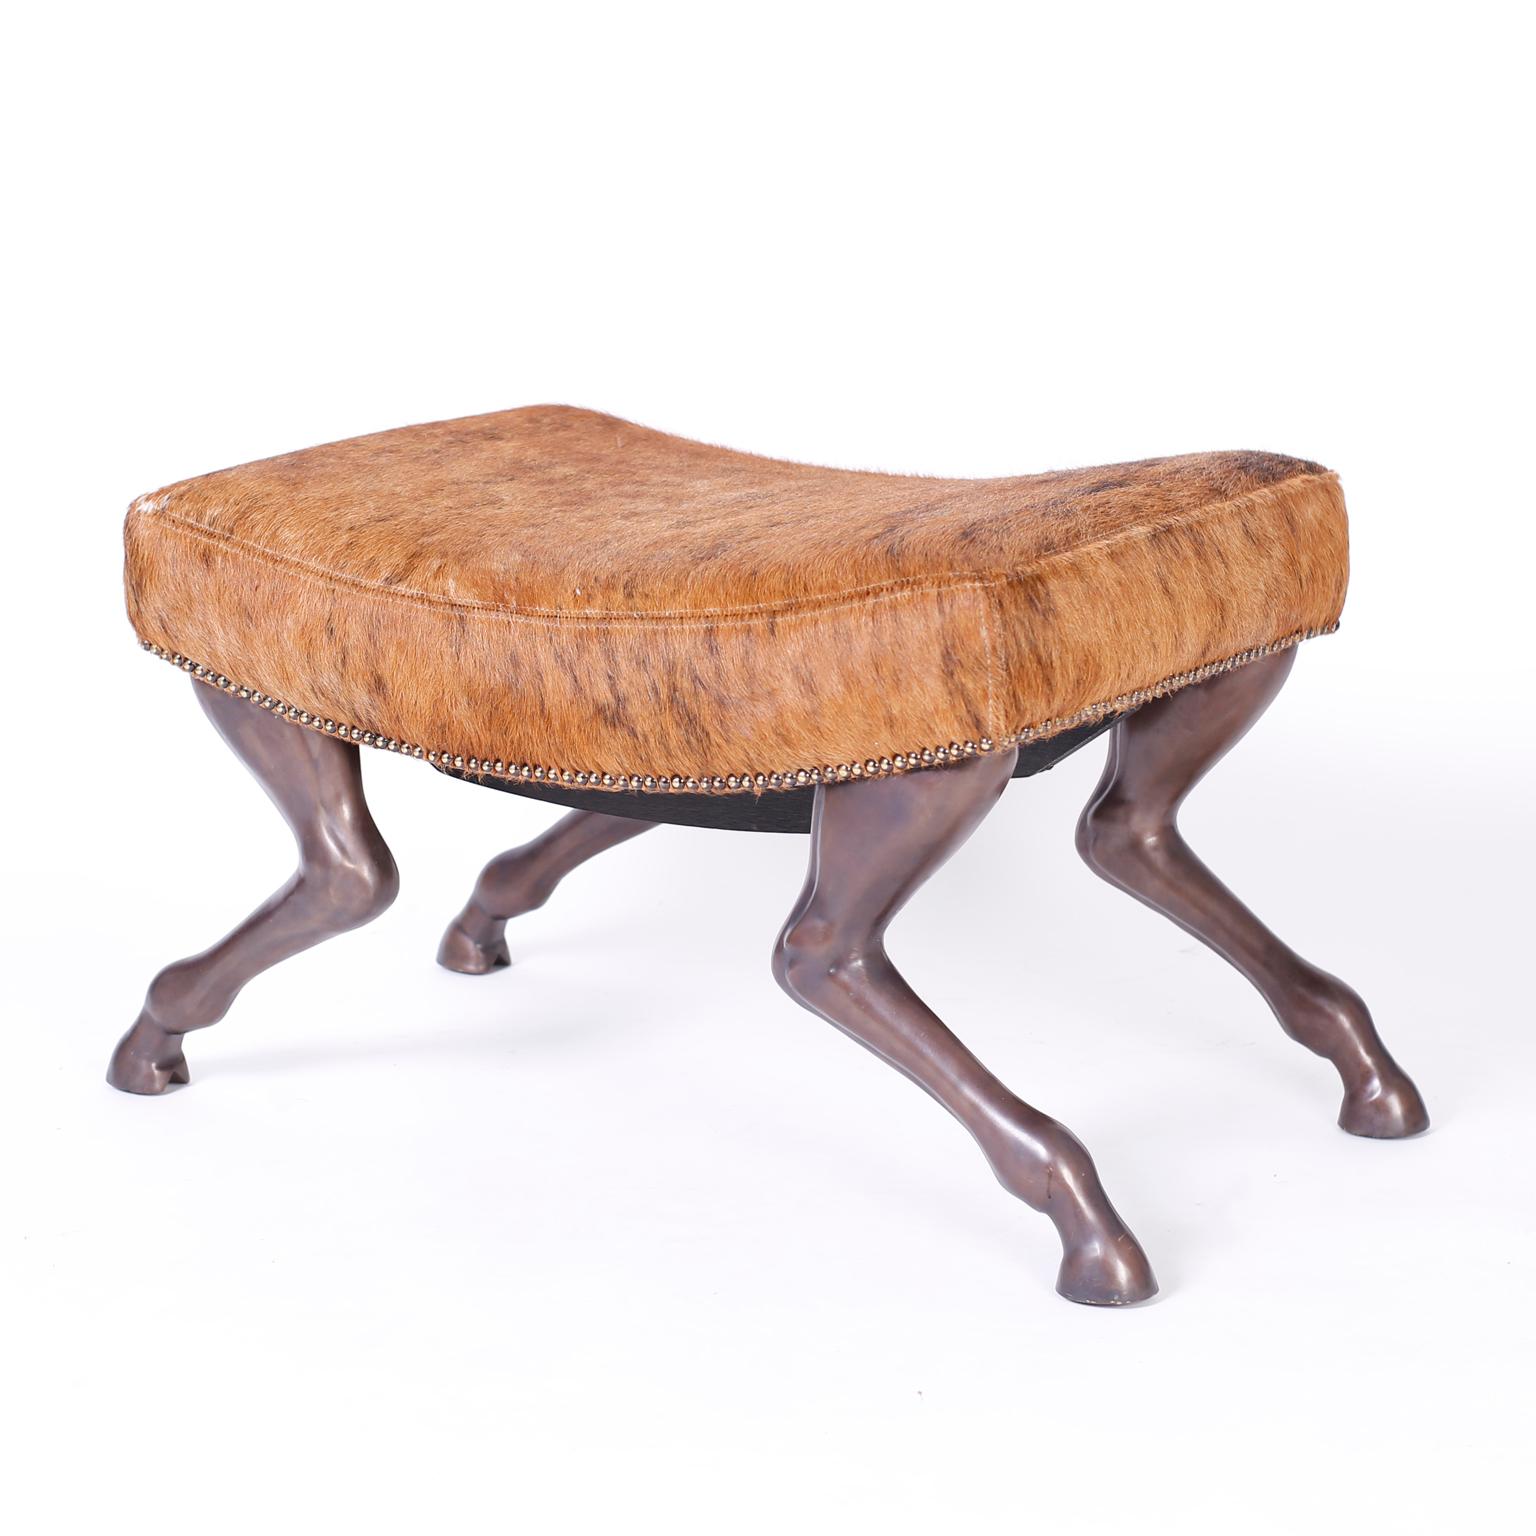  Horse Hide Bench by Theodore Alexander Striking bench or footstool with a concave cushion upholstered in horse hide and bordered with brass tacks over horse form metal legs with a bronze like patina.
